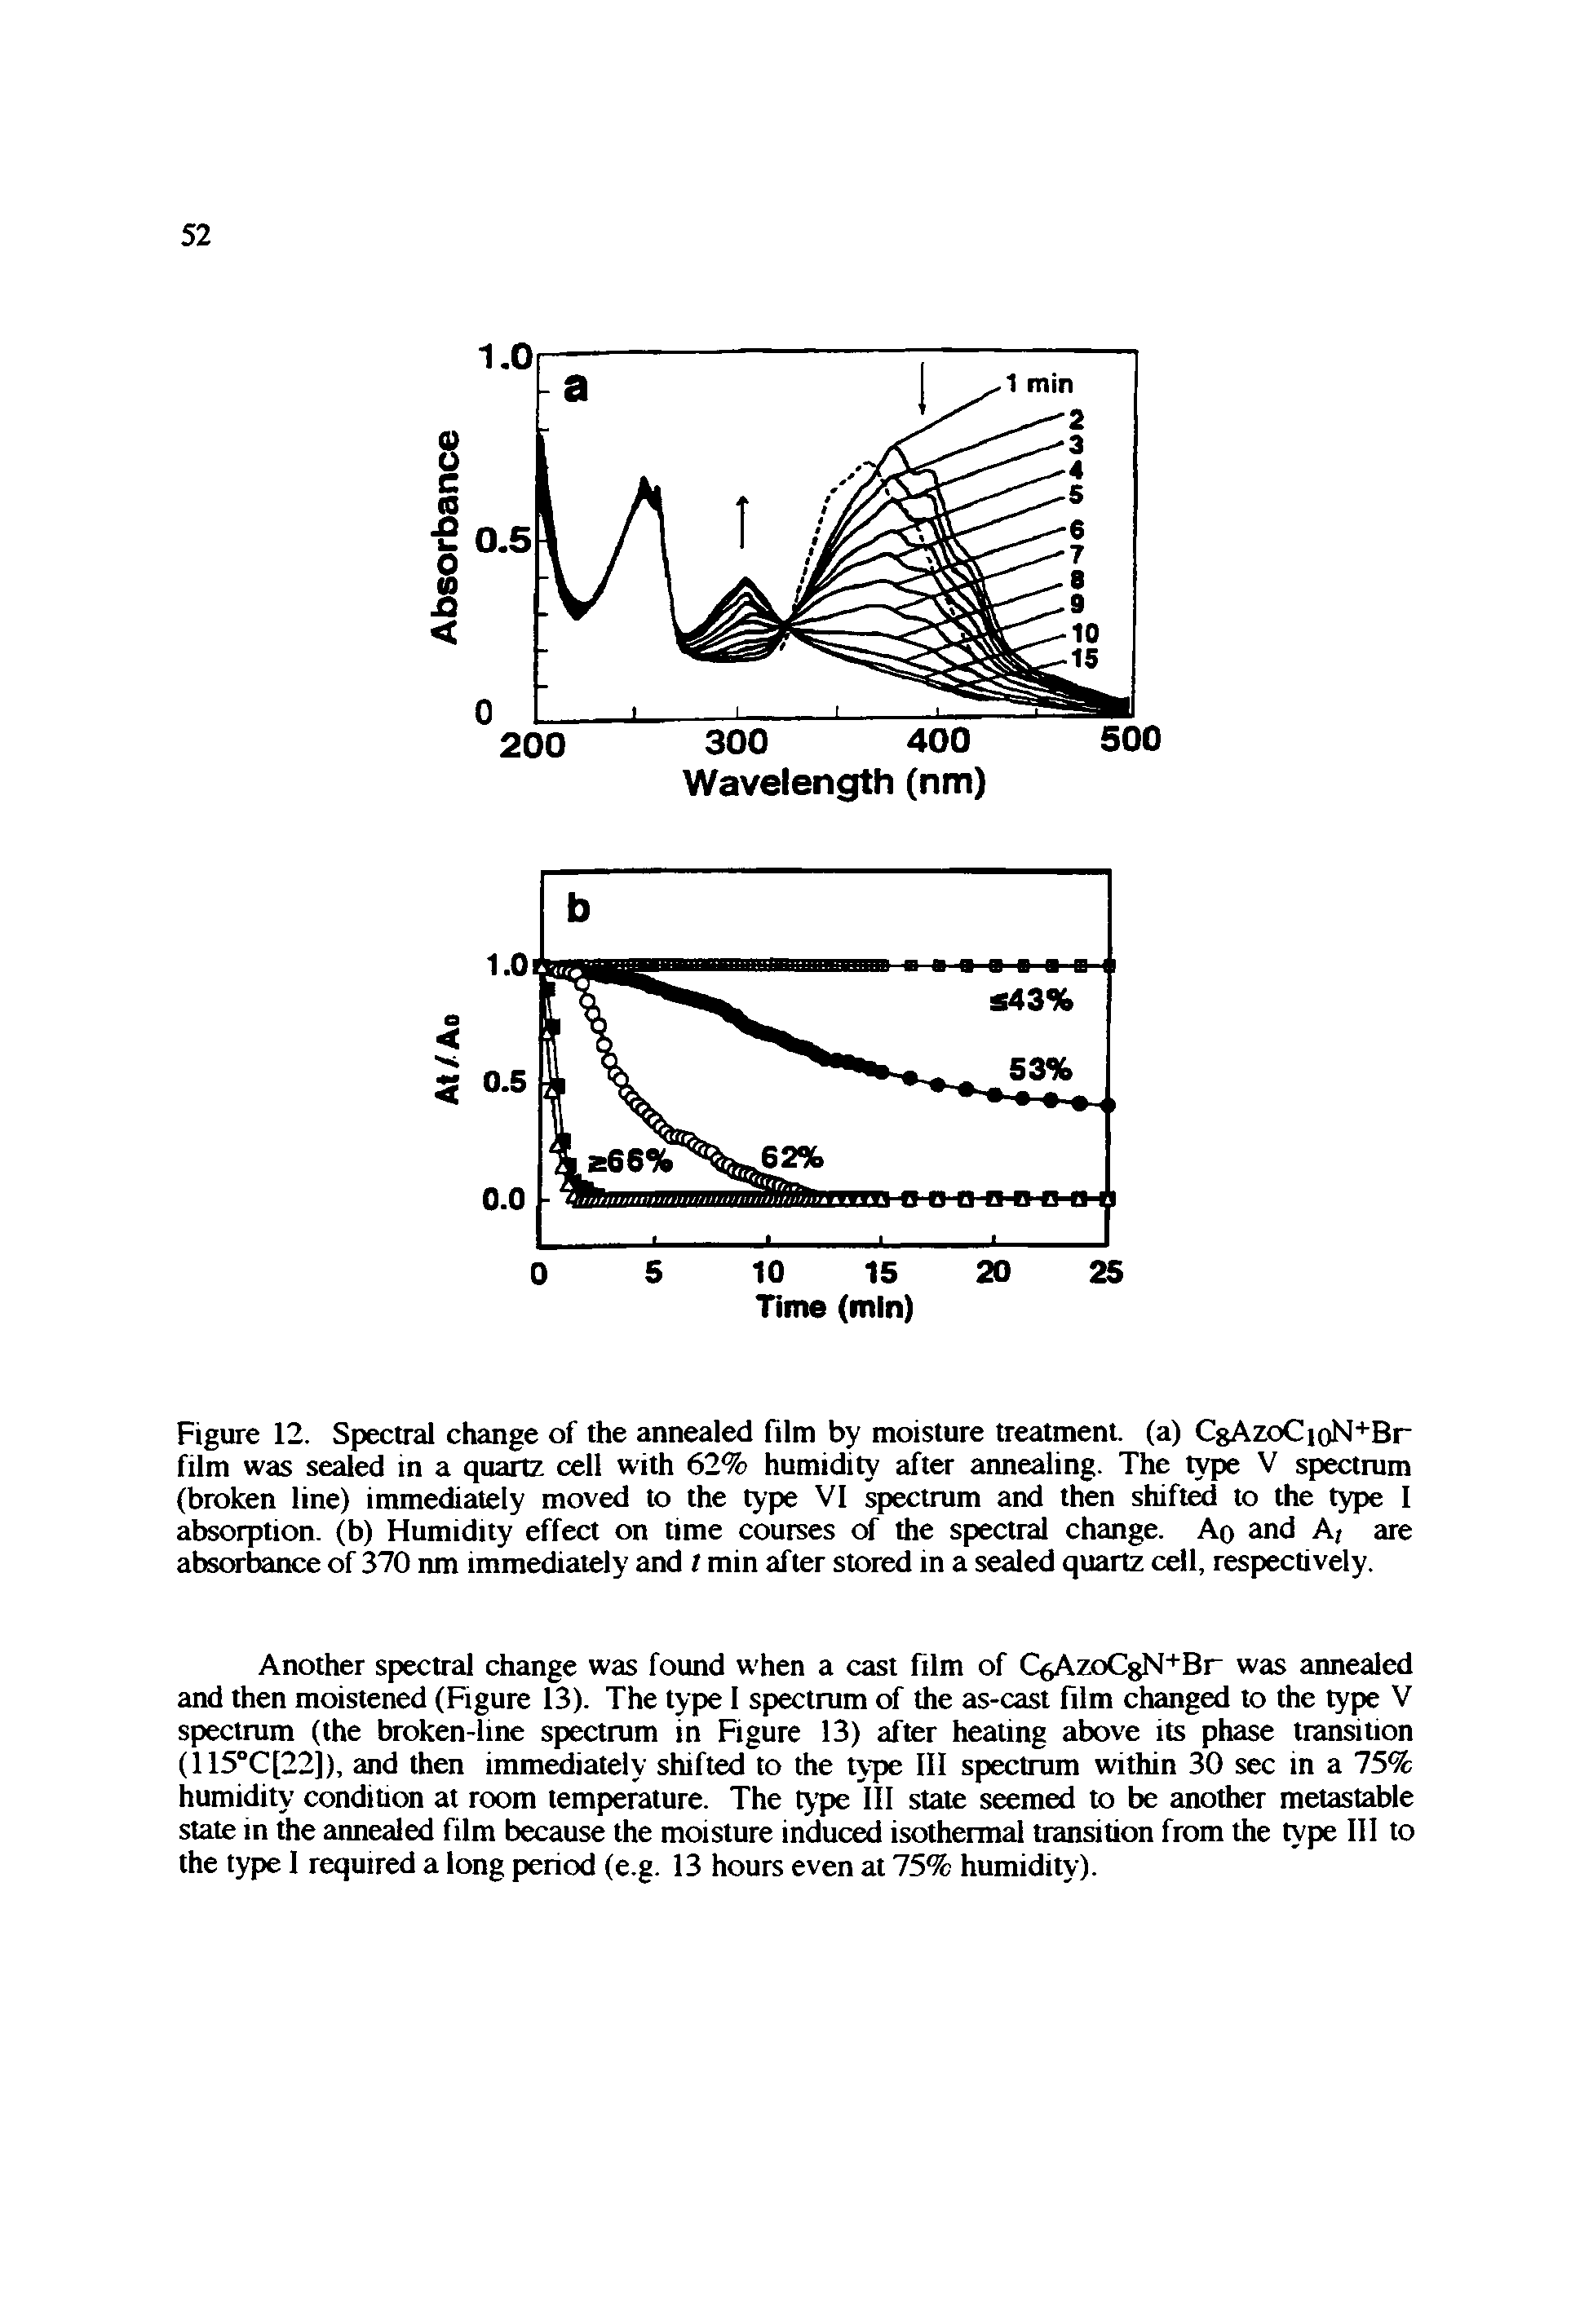 Figure 12. Spectral change of the annealed film by moisture treatment, (a) CgAzoCioN+Br film was sealed in a quartz cell with 62% humidity after annealing. The type V spectrum (broken line) immediately moved to the type VI spectrum and then shifted to the type I absorption, (b) Humidity effect on time courses of the spectral change. Ao and A, are absorbance of 370 nm immediately and l min after stored in a sealed quartz cell, respectively.